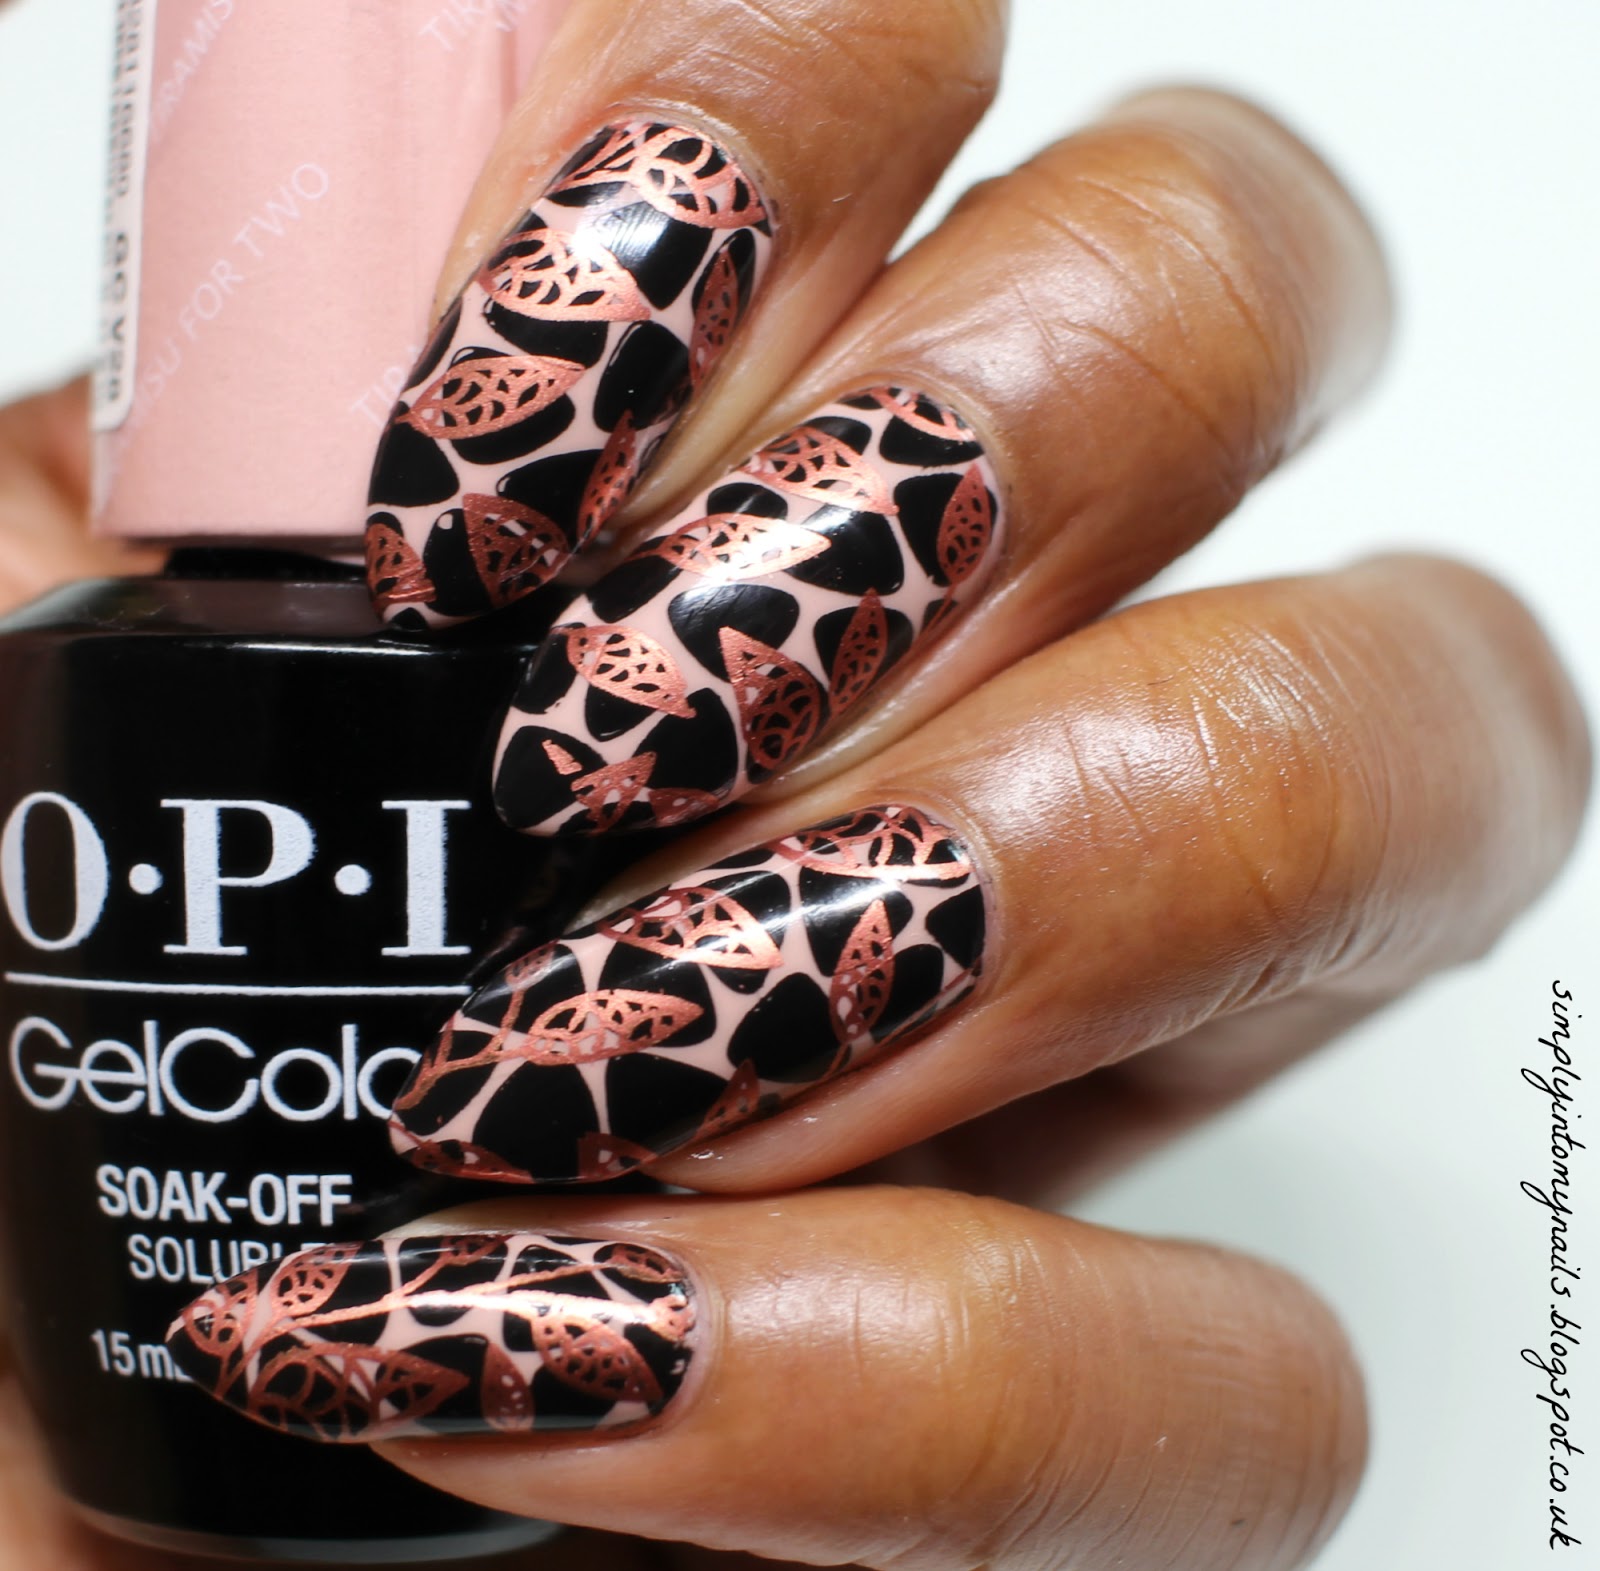 Jord Watch Manicure With Opi Gelcolor Tiramisu For Two Simply Into My Nails